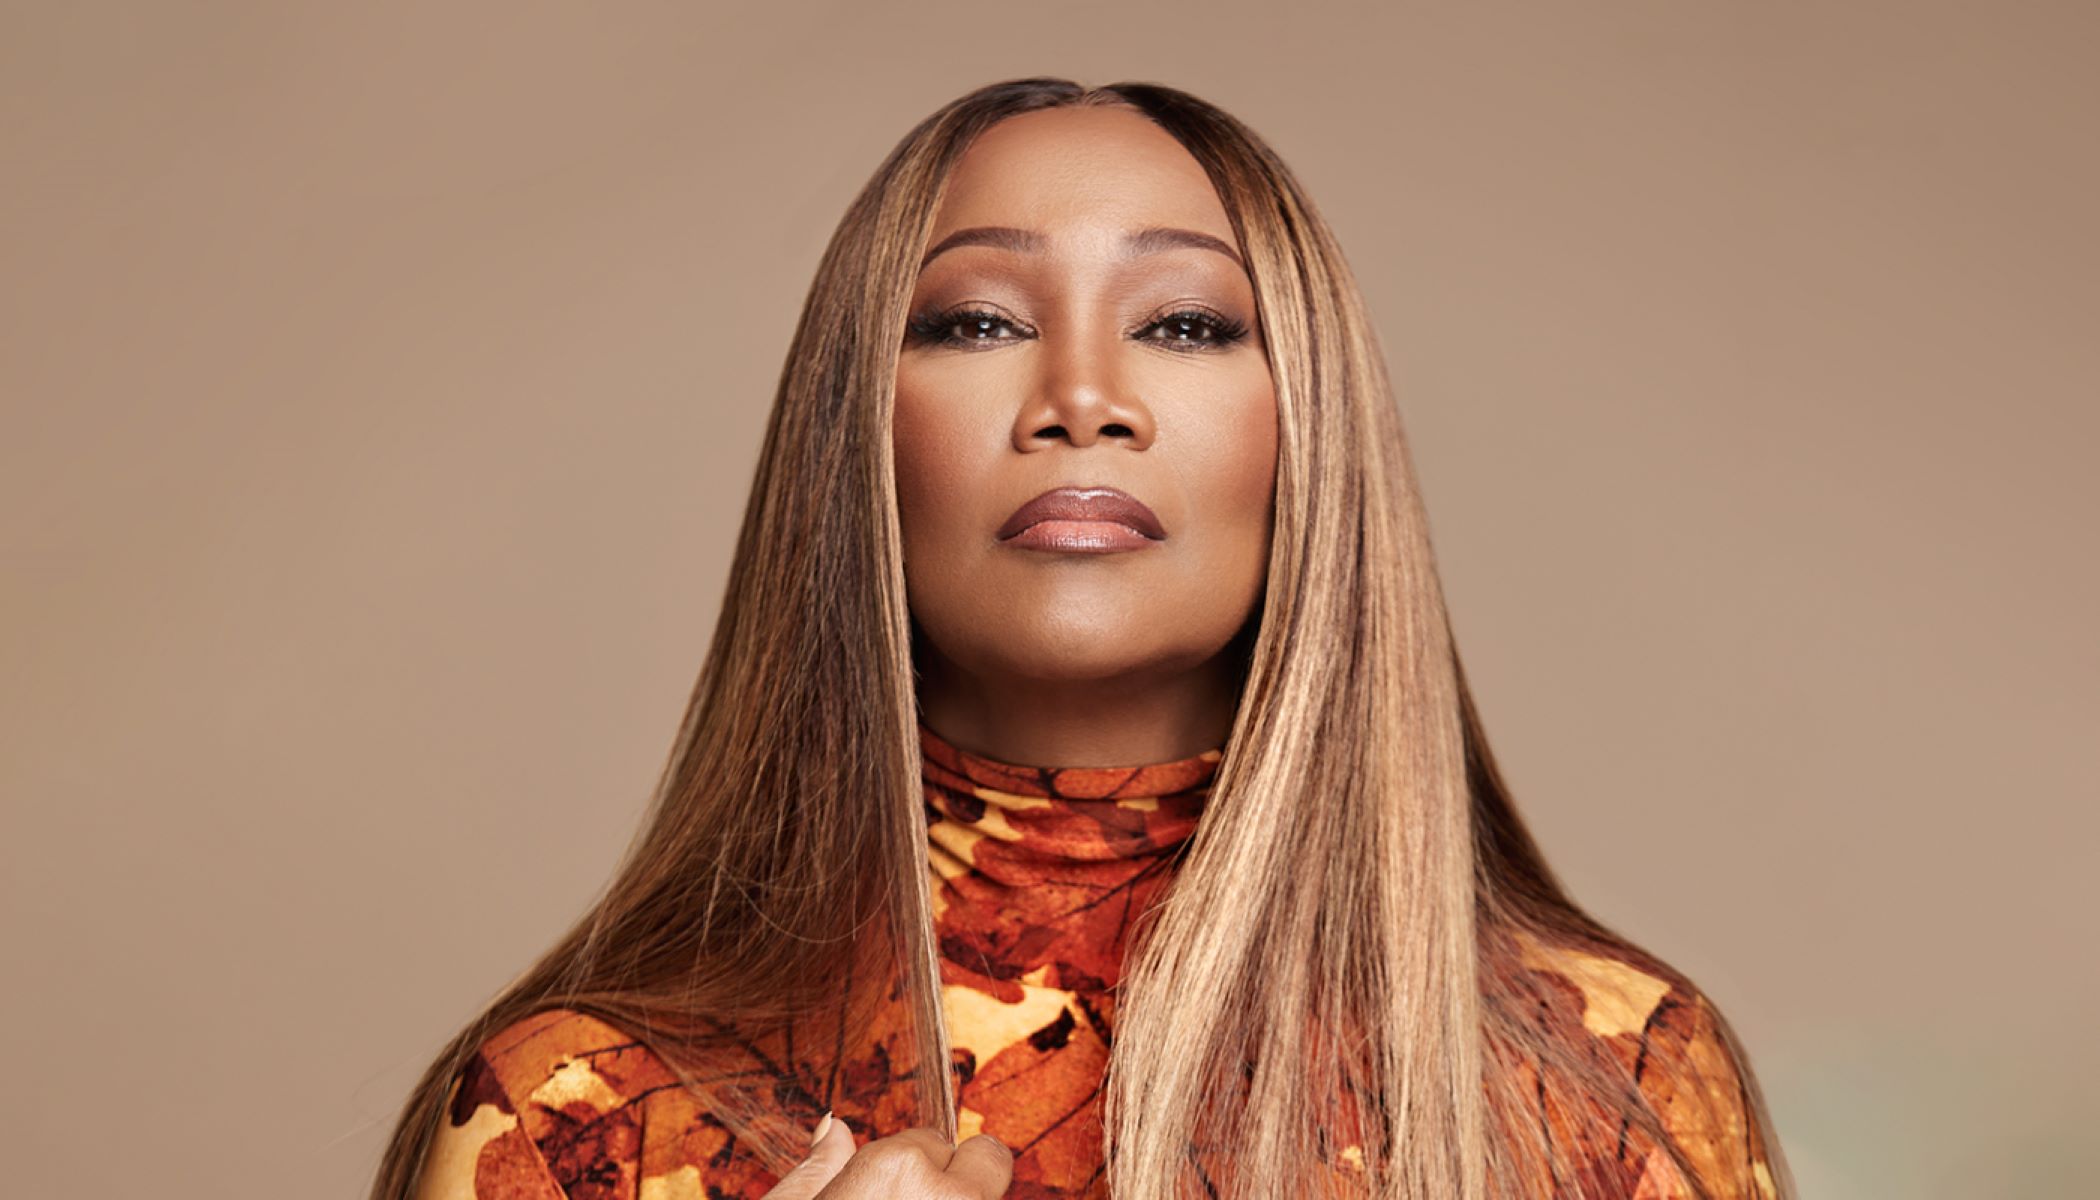 14 Intriguing Facts About Yolanda Adams - Facts.net